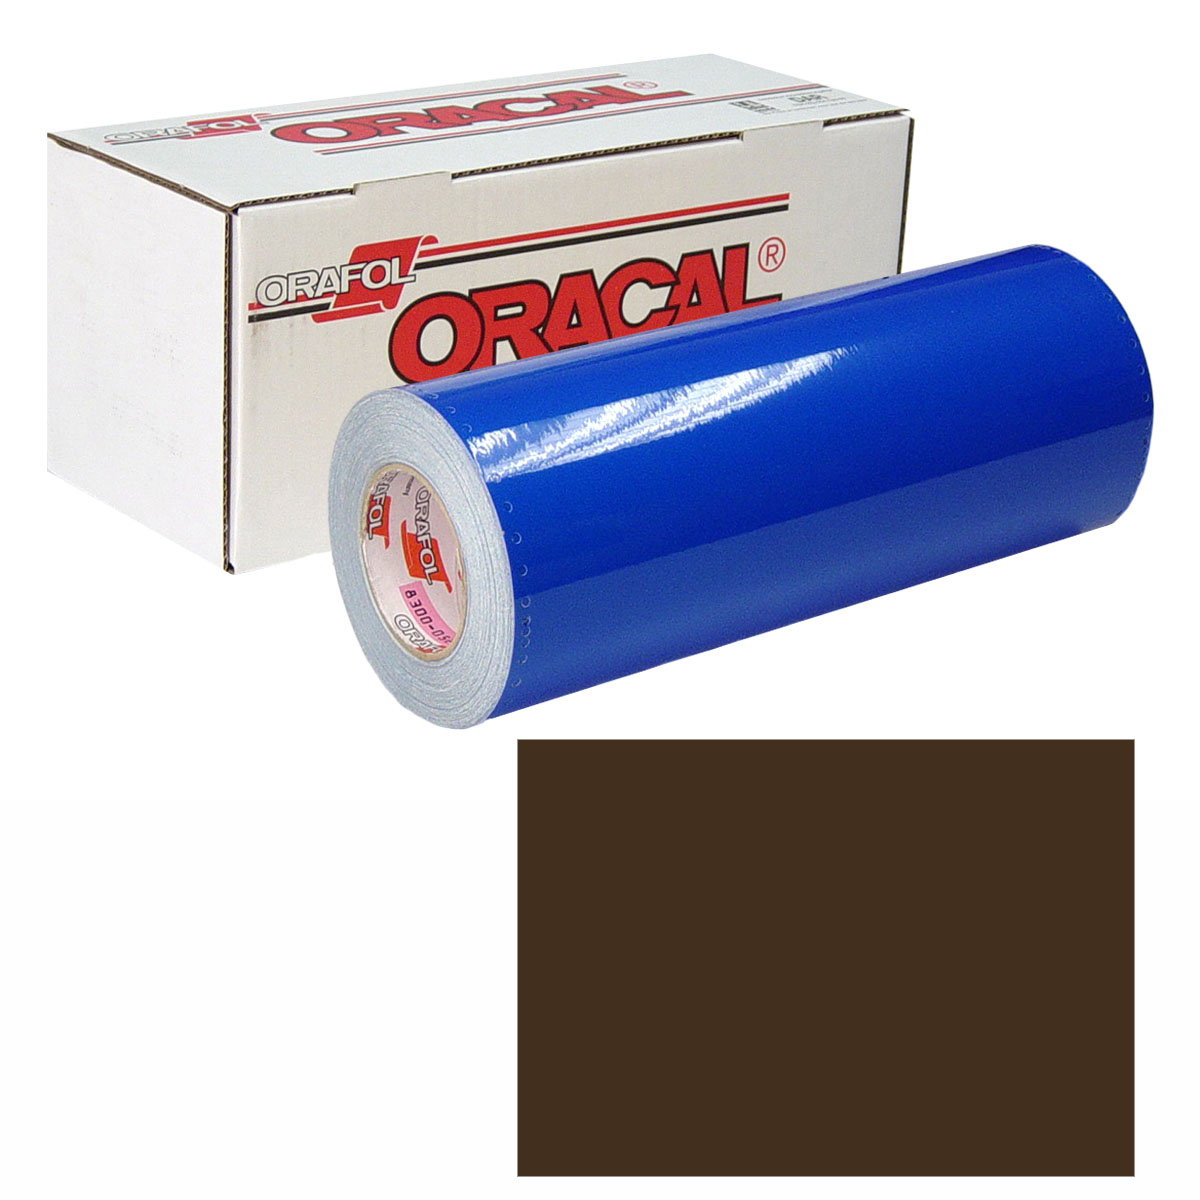 ORACAL 631 30in X 10yd 080 Brown